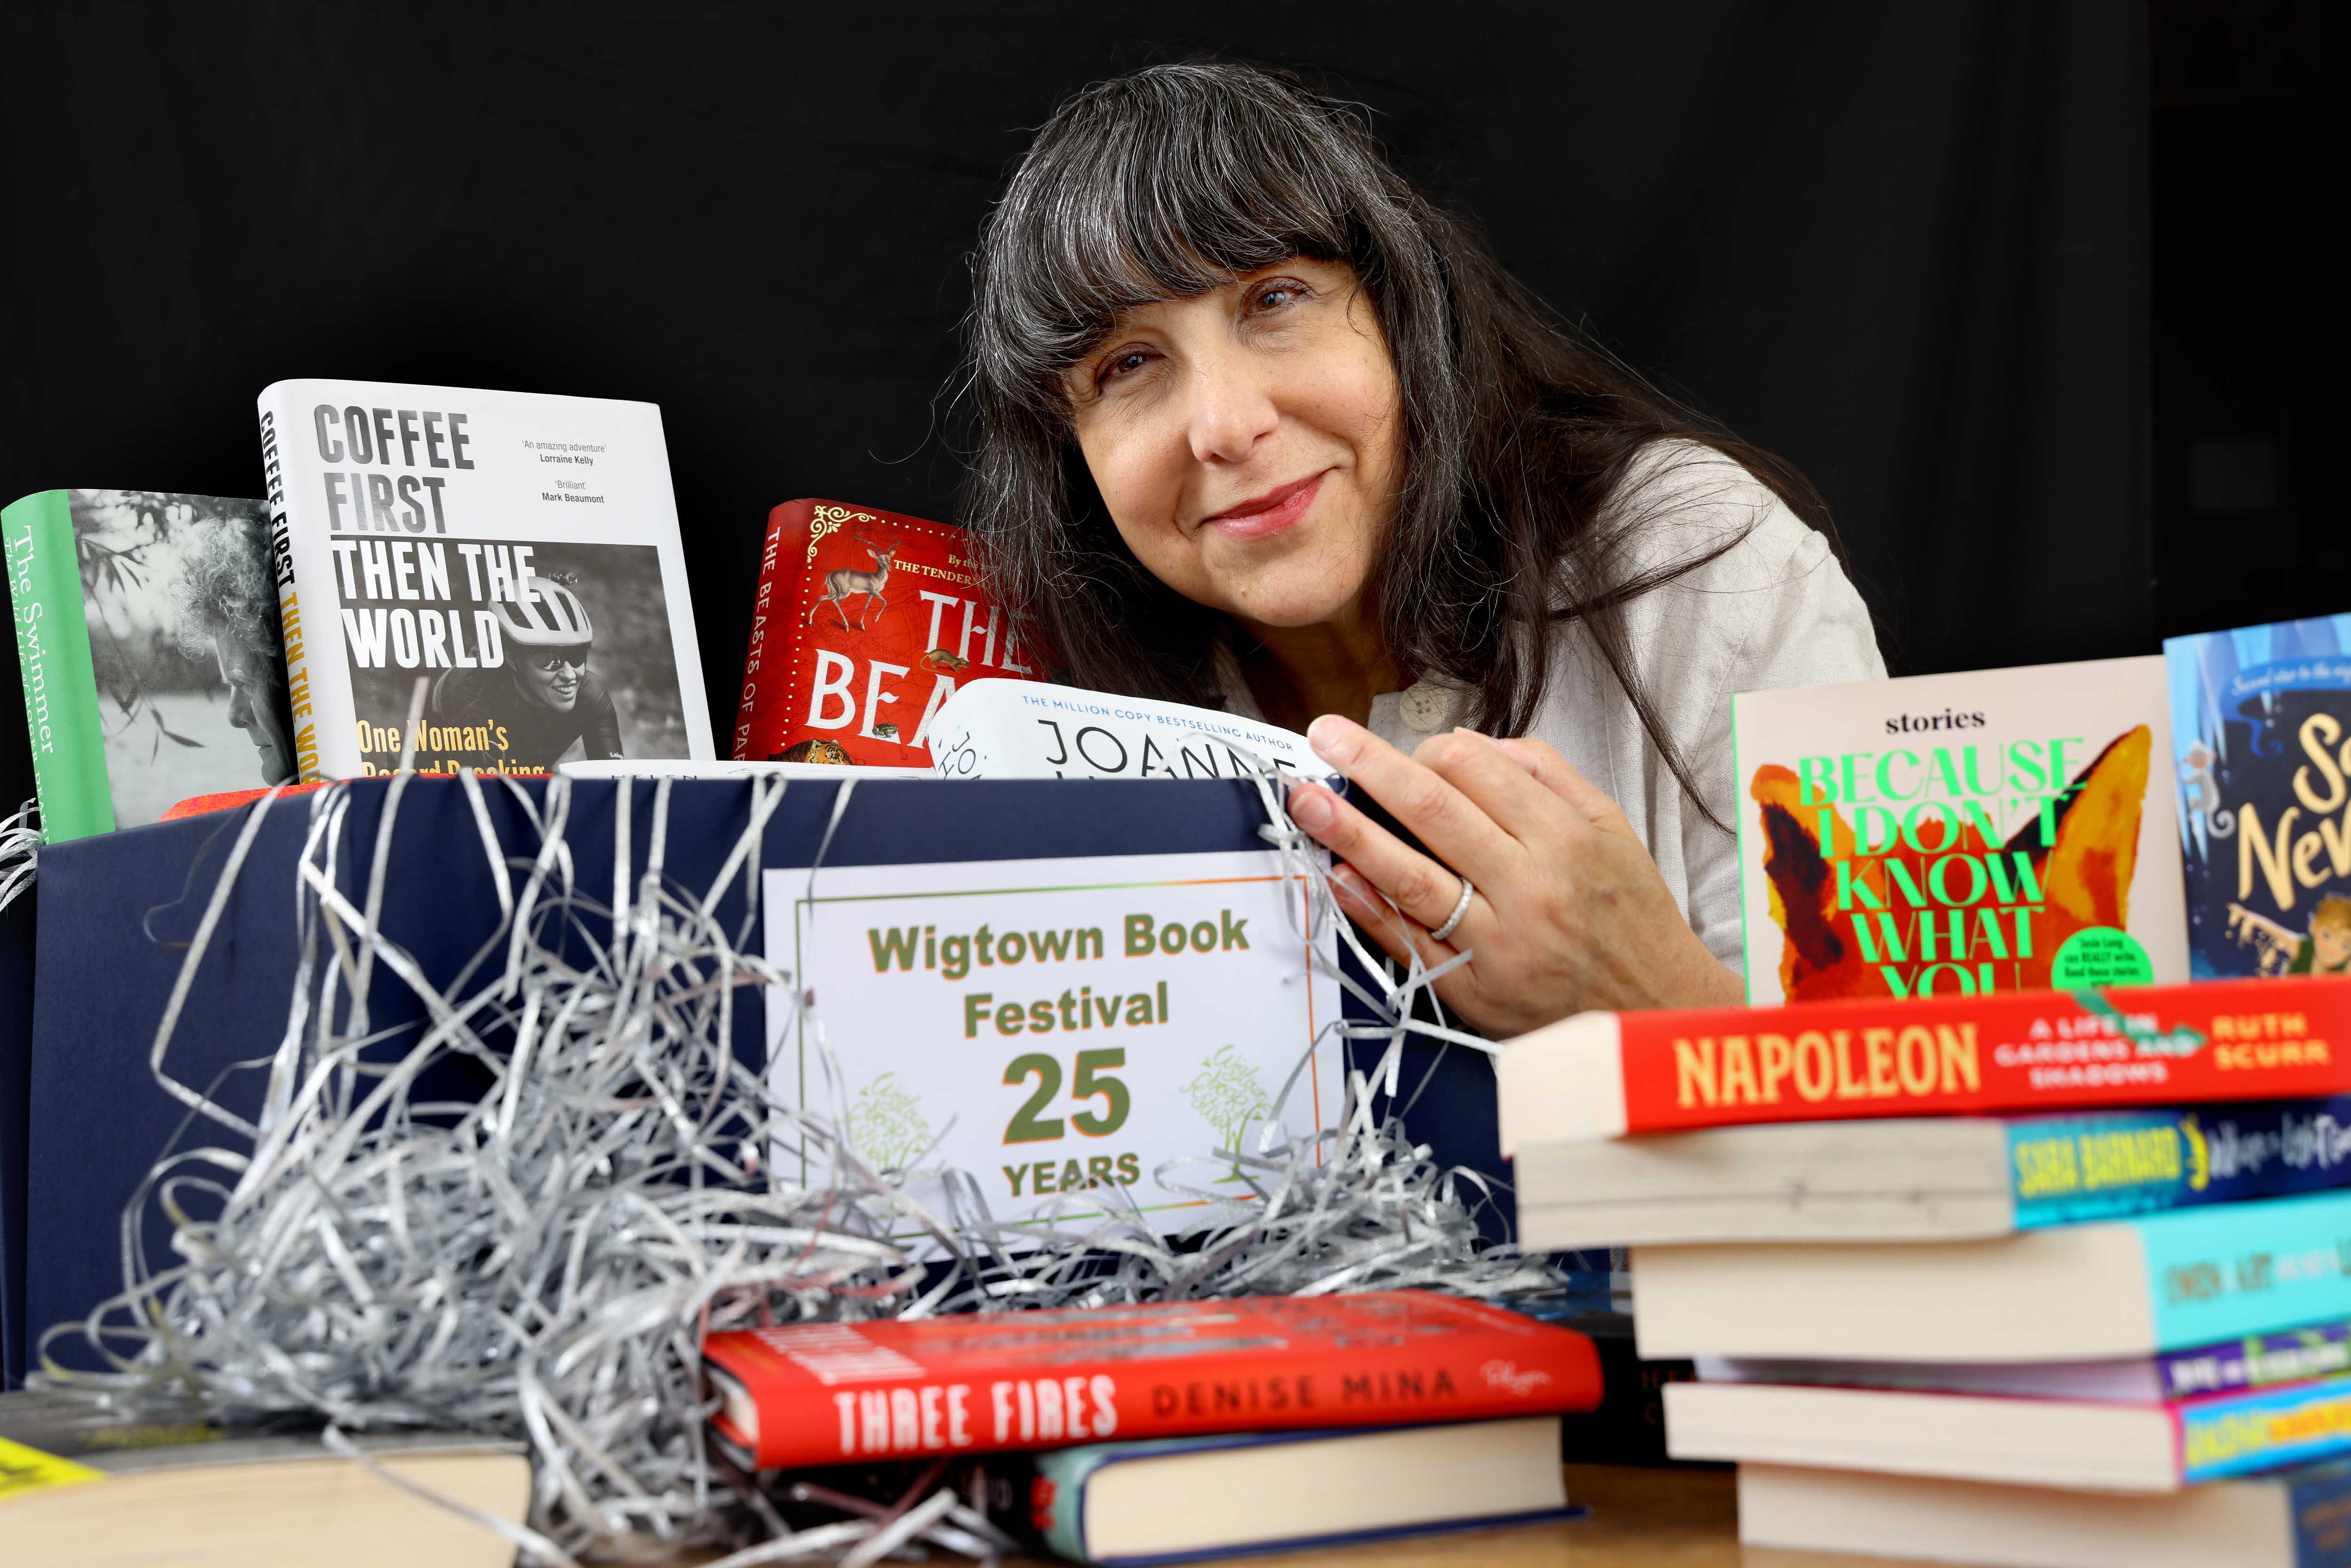 Lee Randall, Guest Programmer for Wigtown Festival Company stands behind many books placed on a table to promote the twenty fifth anniversary of the Wigtown Book Festival.